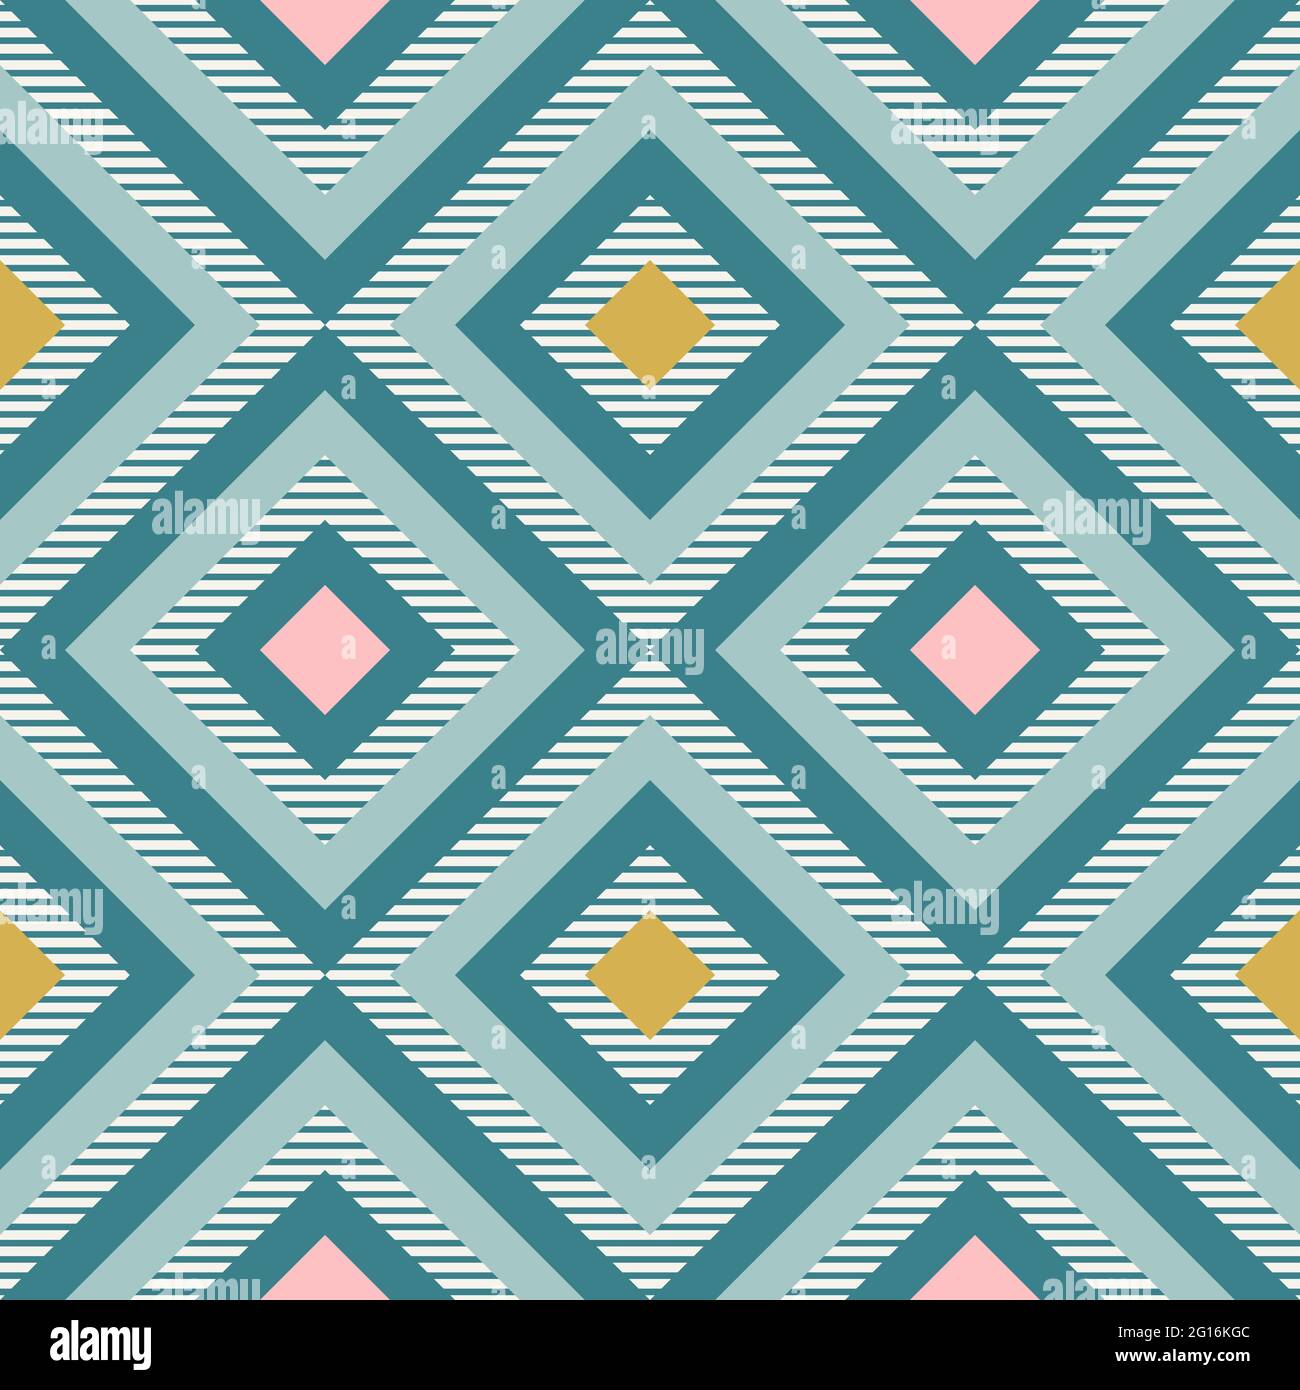 Abstract geometry in retro colors, diamond shapes geo pattern. Seamless vector pattern. Mint and coral pink background. Fashion fabric pattern design. Stock Vector